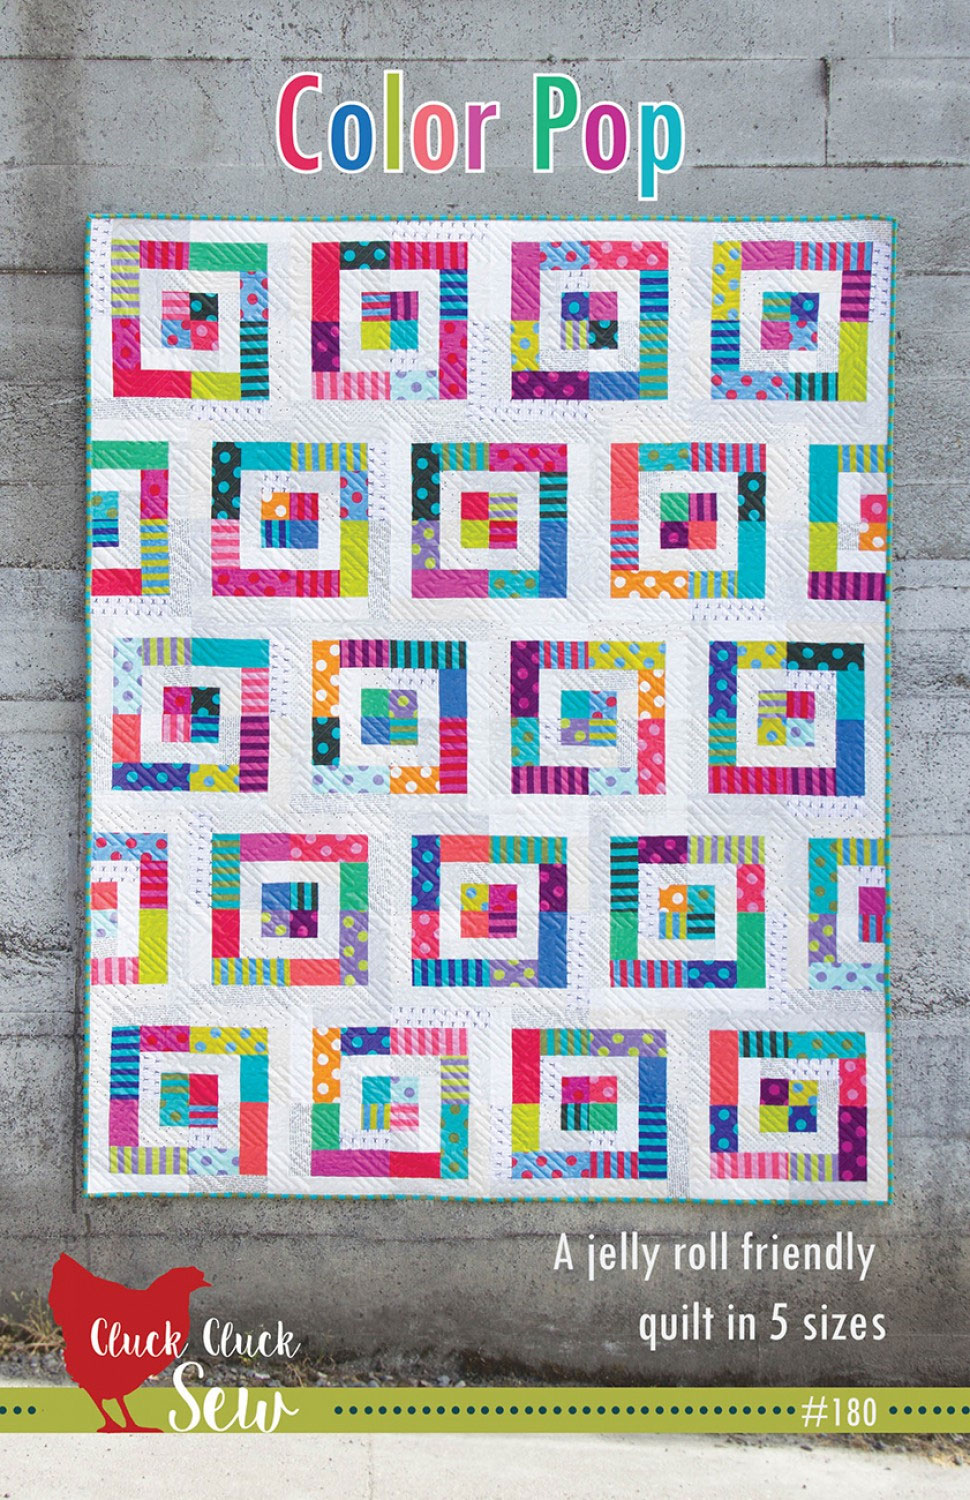 Color-Pop-quilt-sewing-pattern-Cluck-Cluck-Sew-front